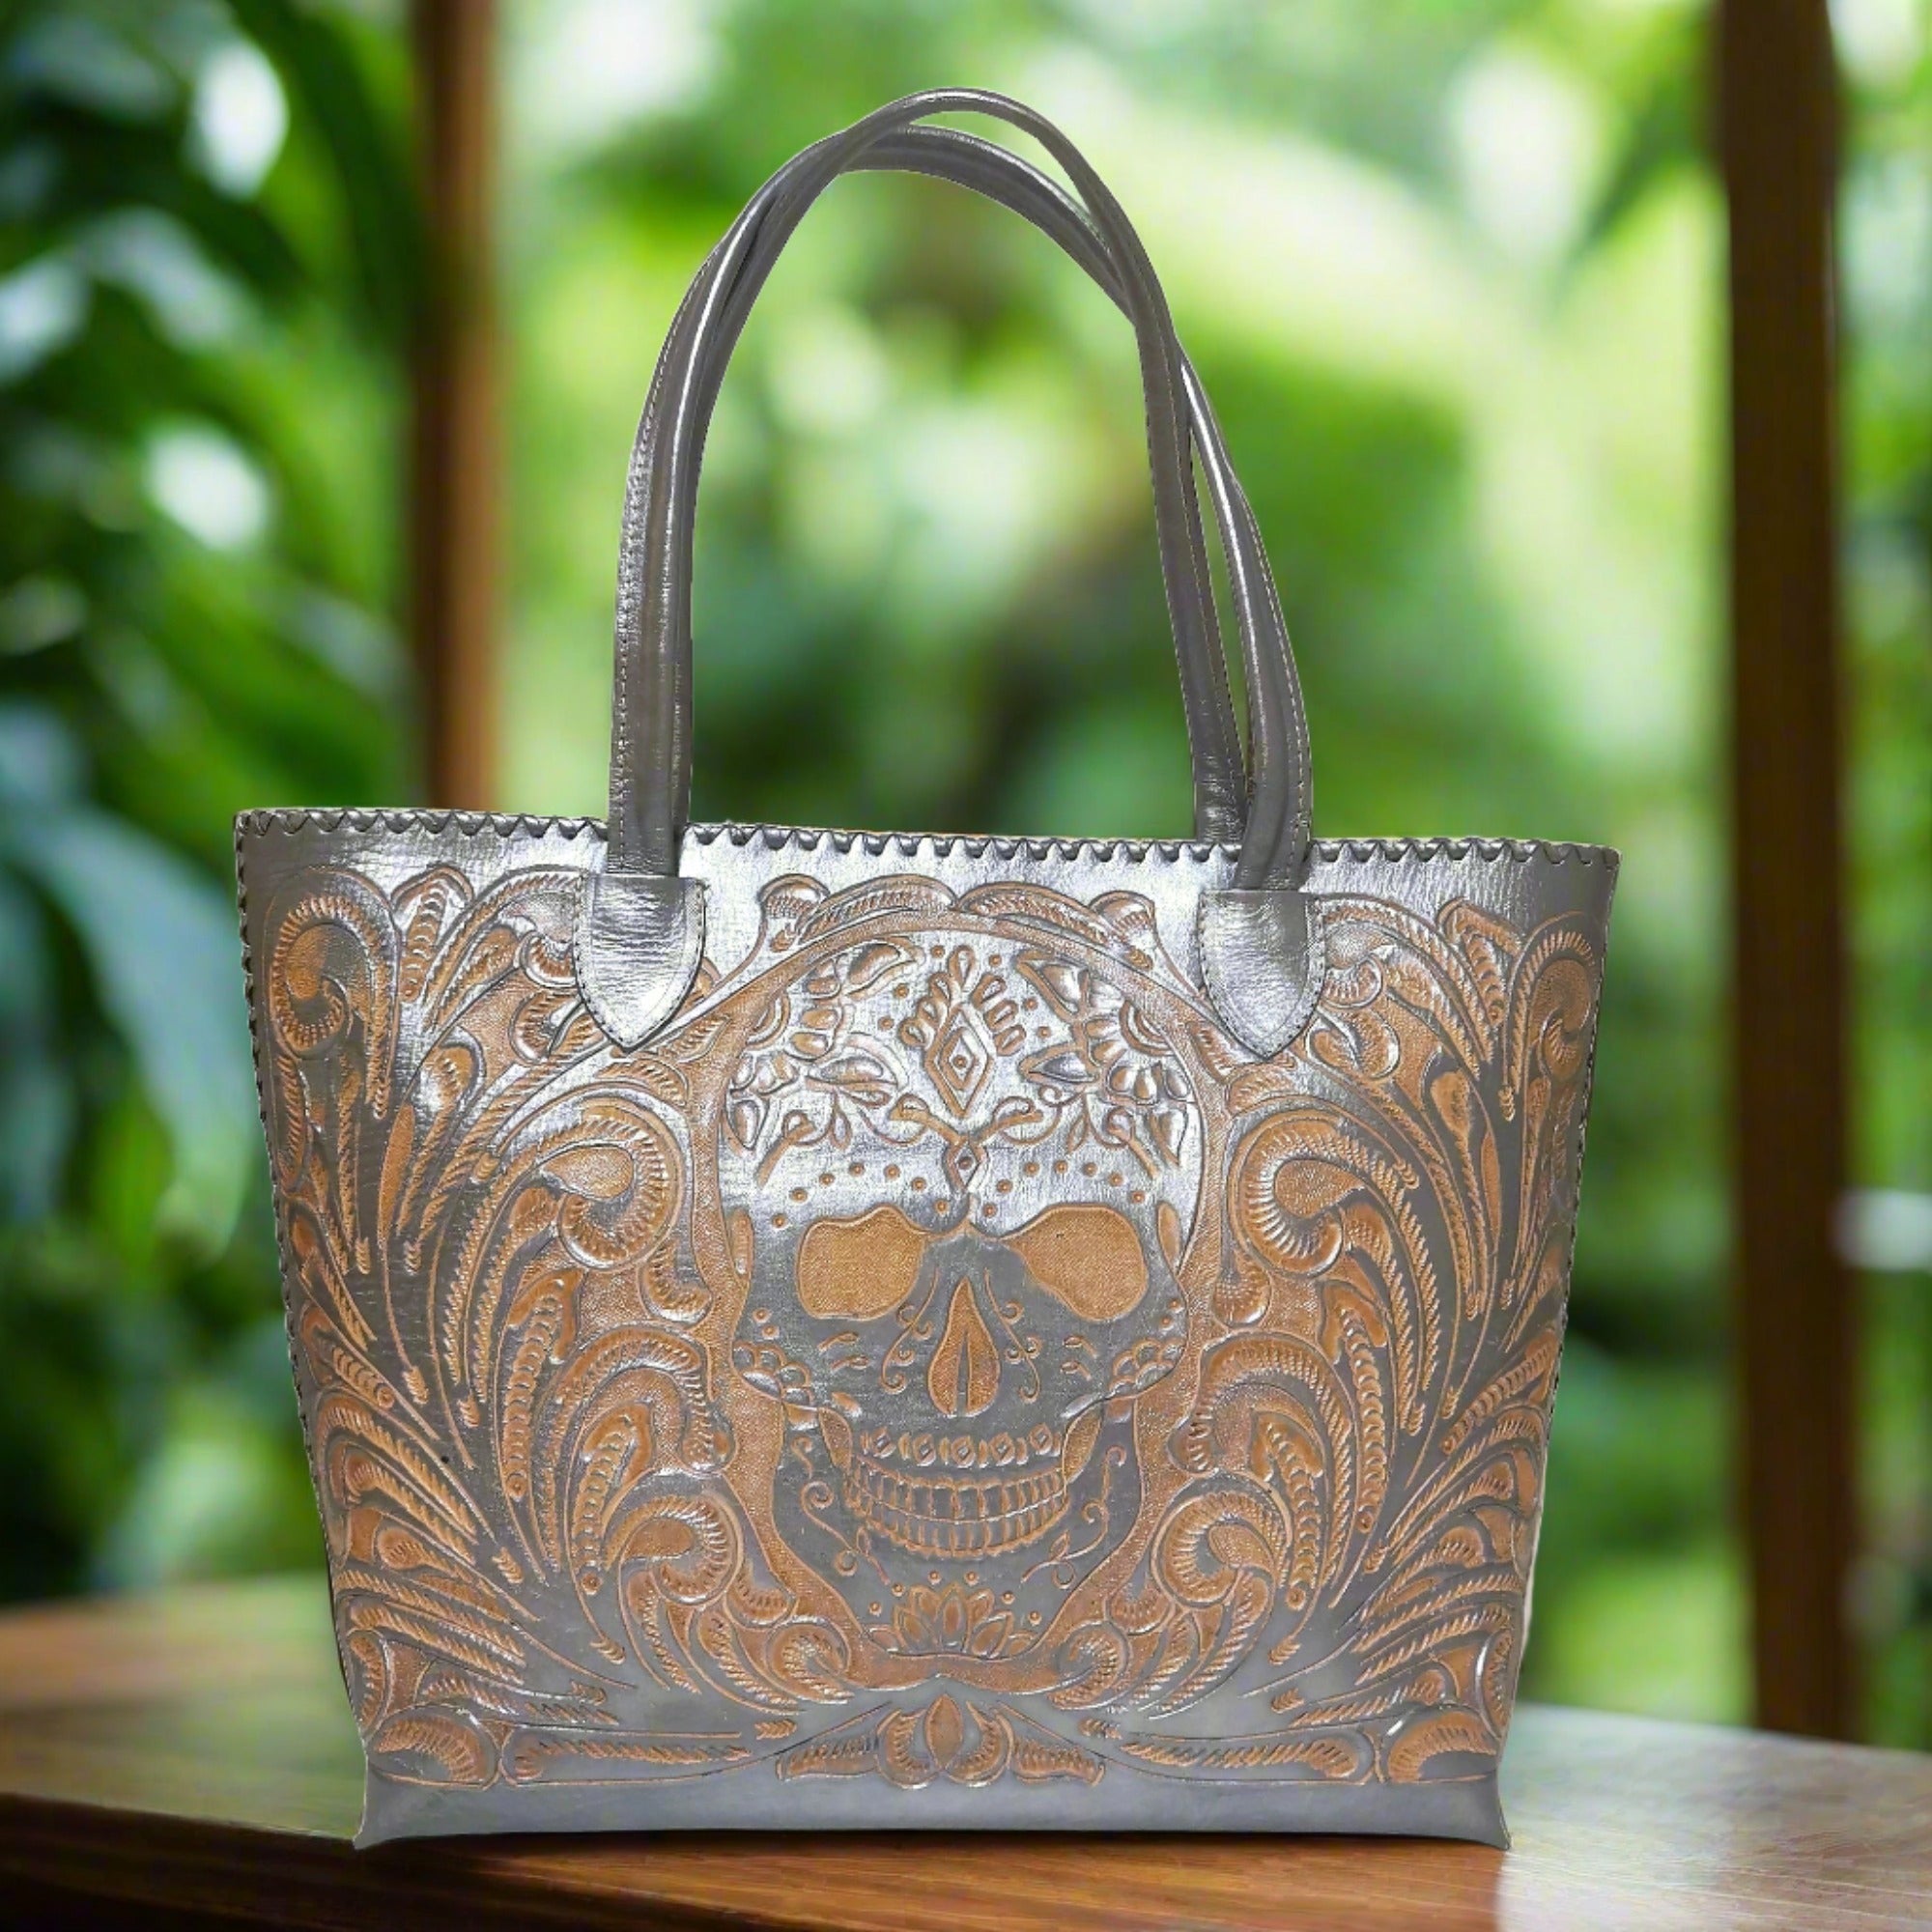 Tote leather bag for women , Hand tooled leather bag, Hand carved leather tote bag, genuine veg-tan leather bag